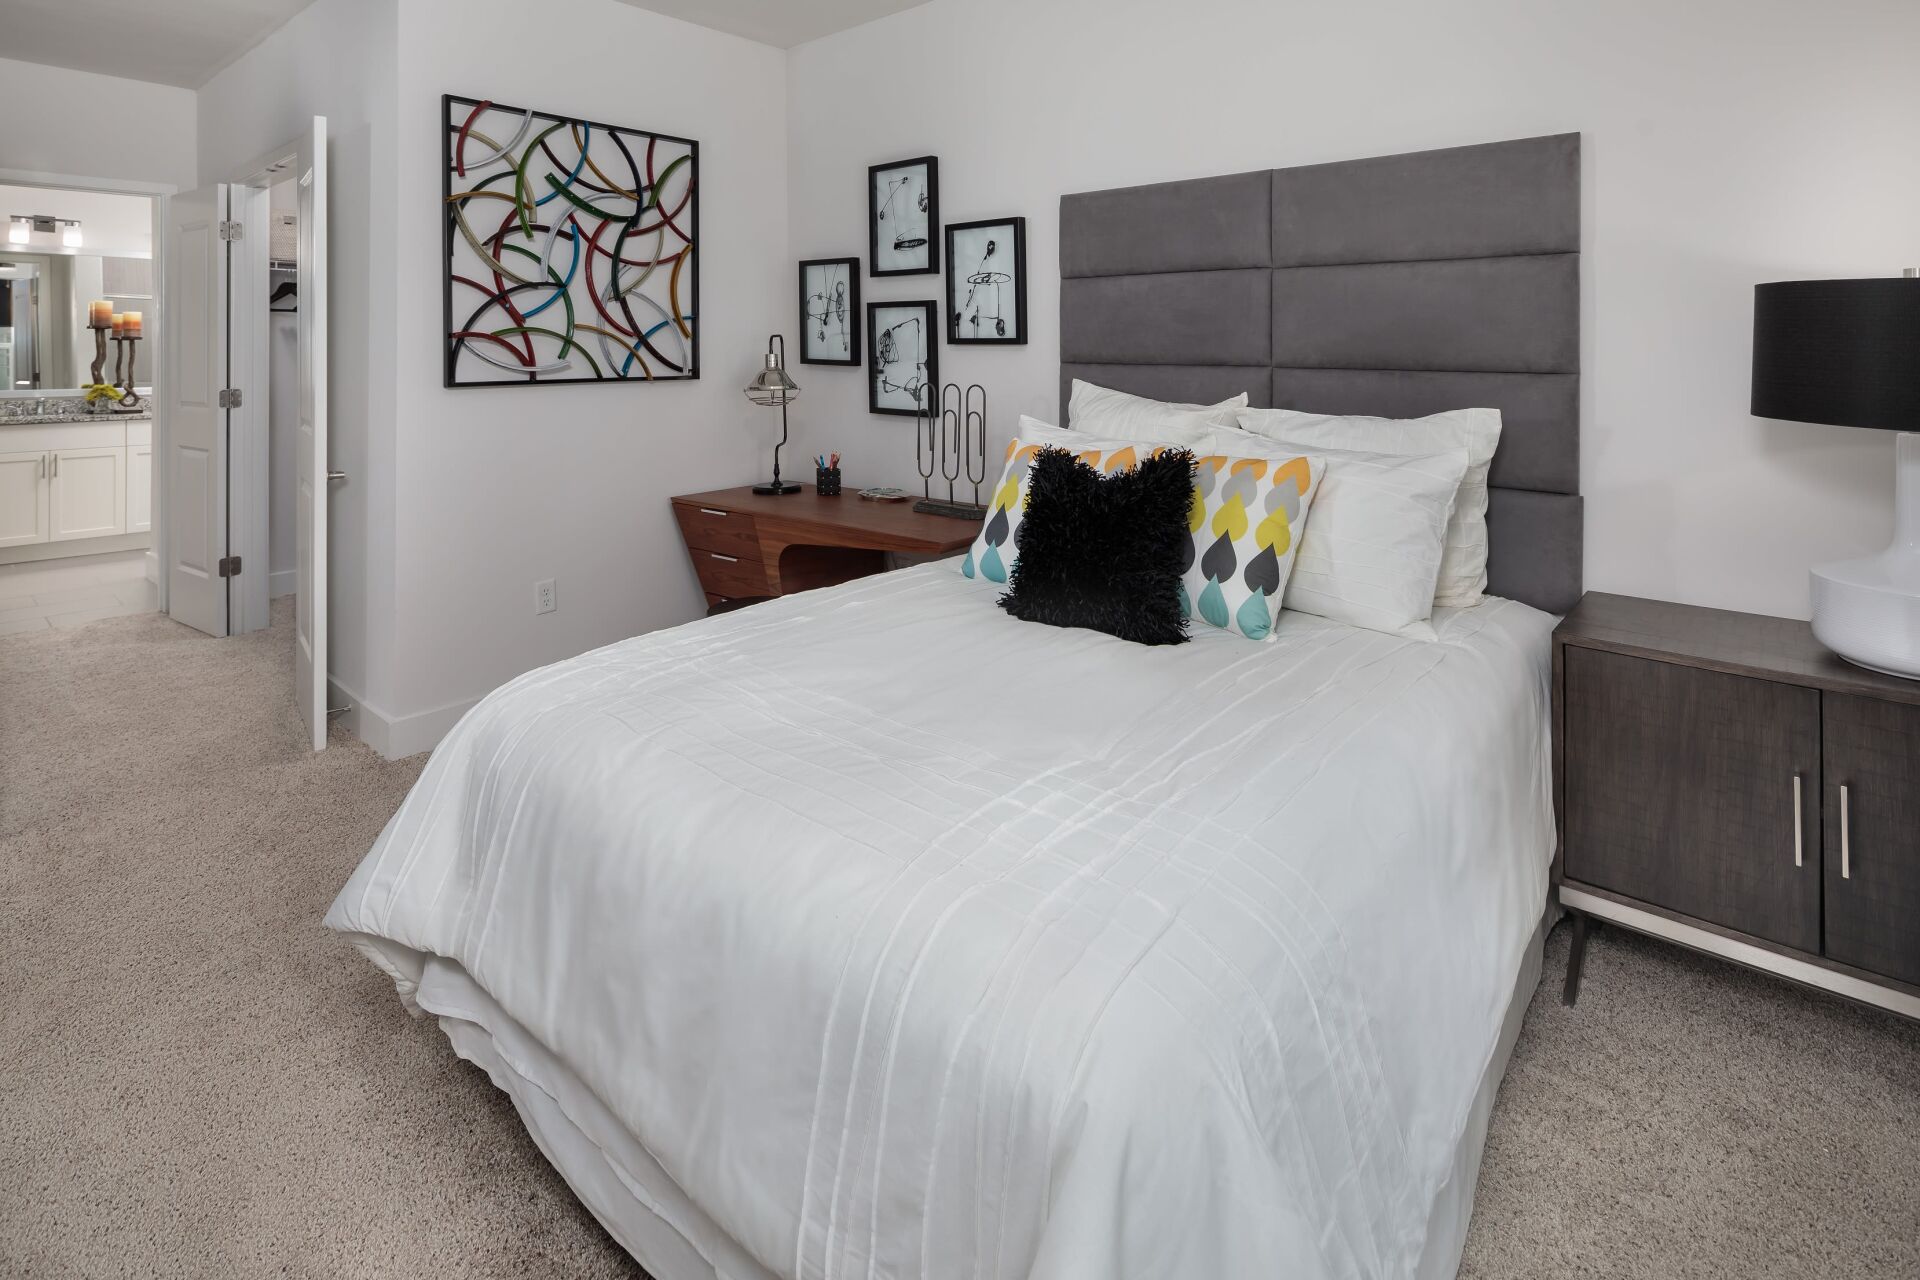 Central Station on Orange | Modern Bedroom with Bed and Wall Art